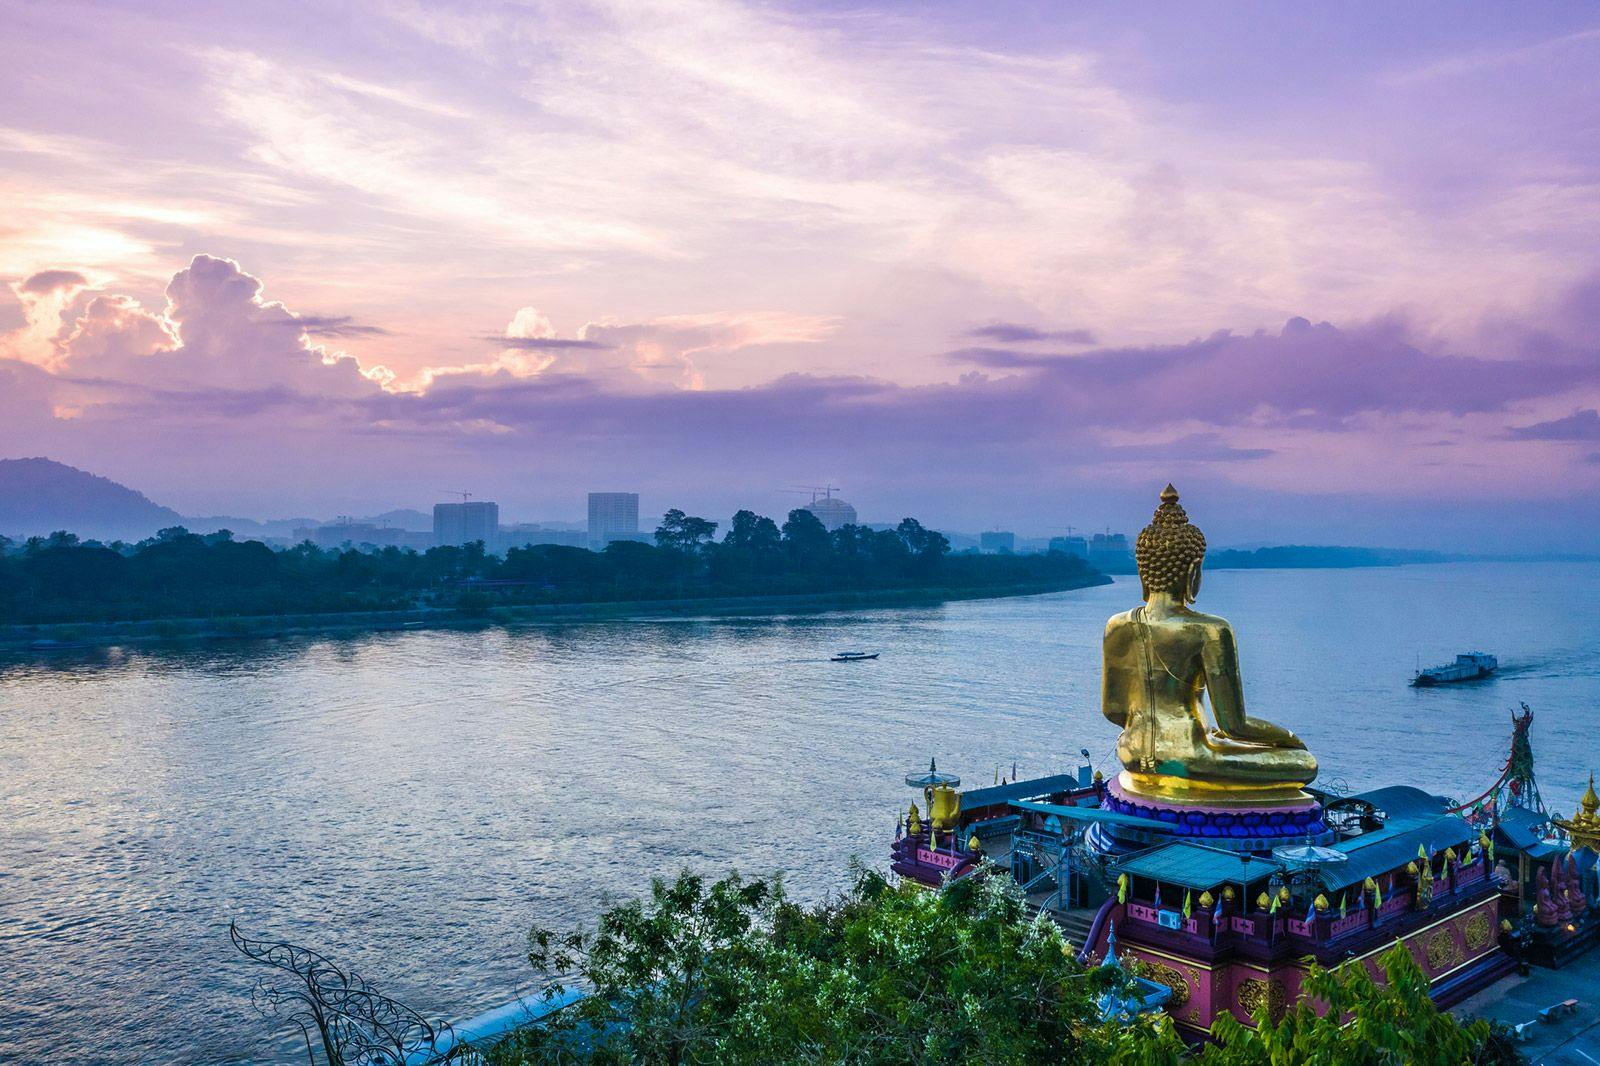 A golden buddah siting on a hill overlooking the Mekong River in Thailand